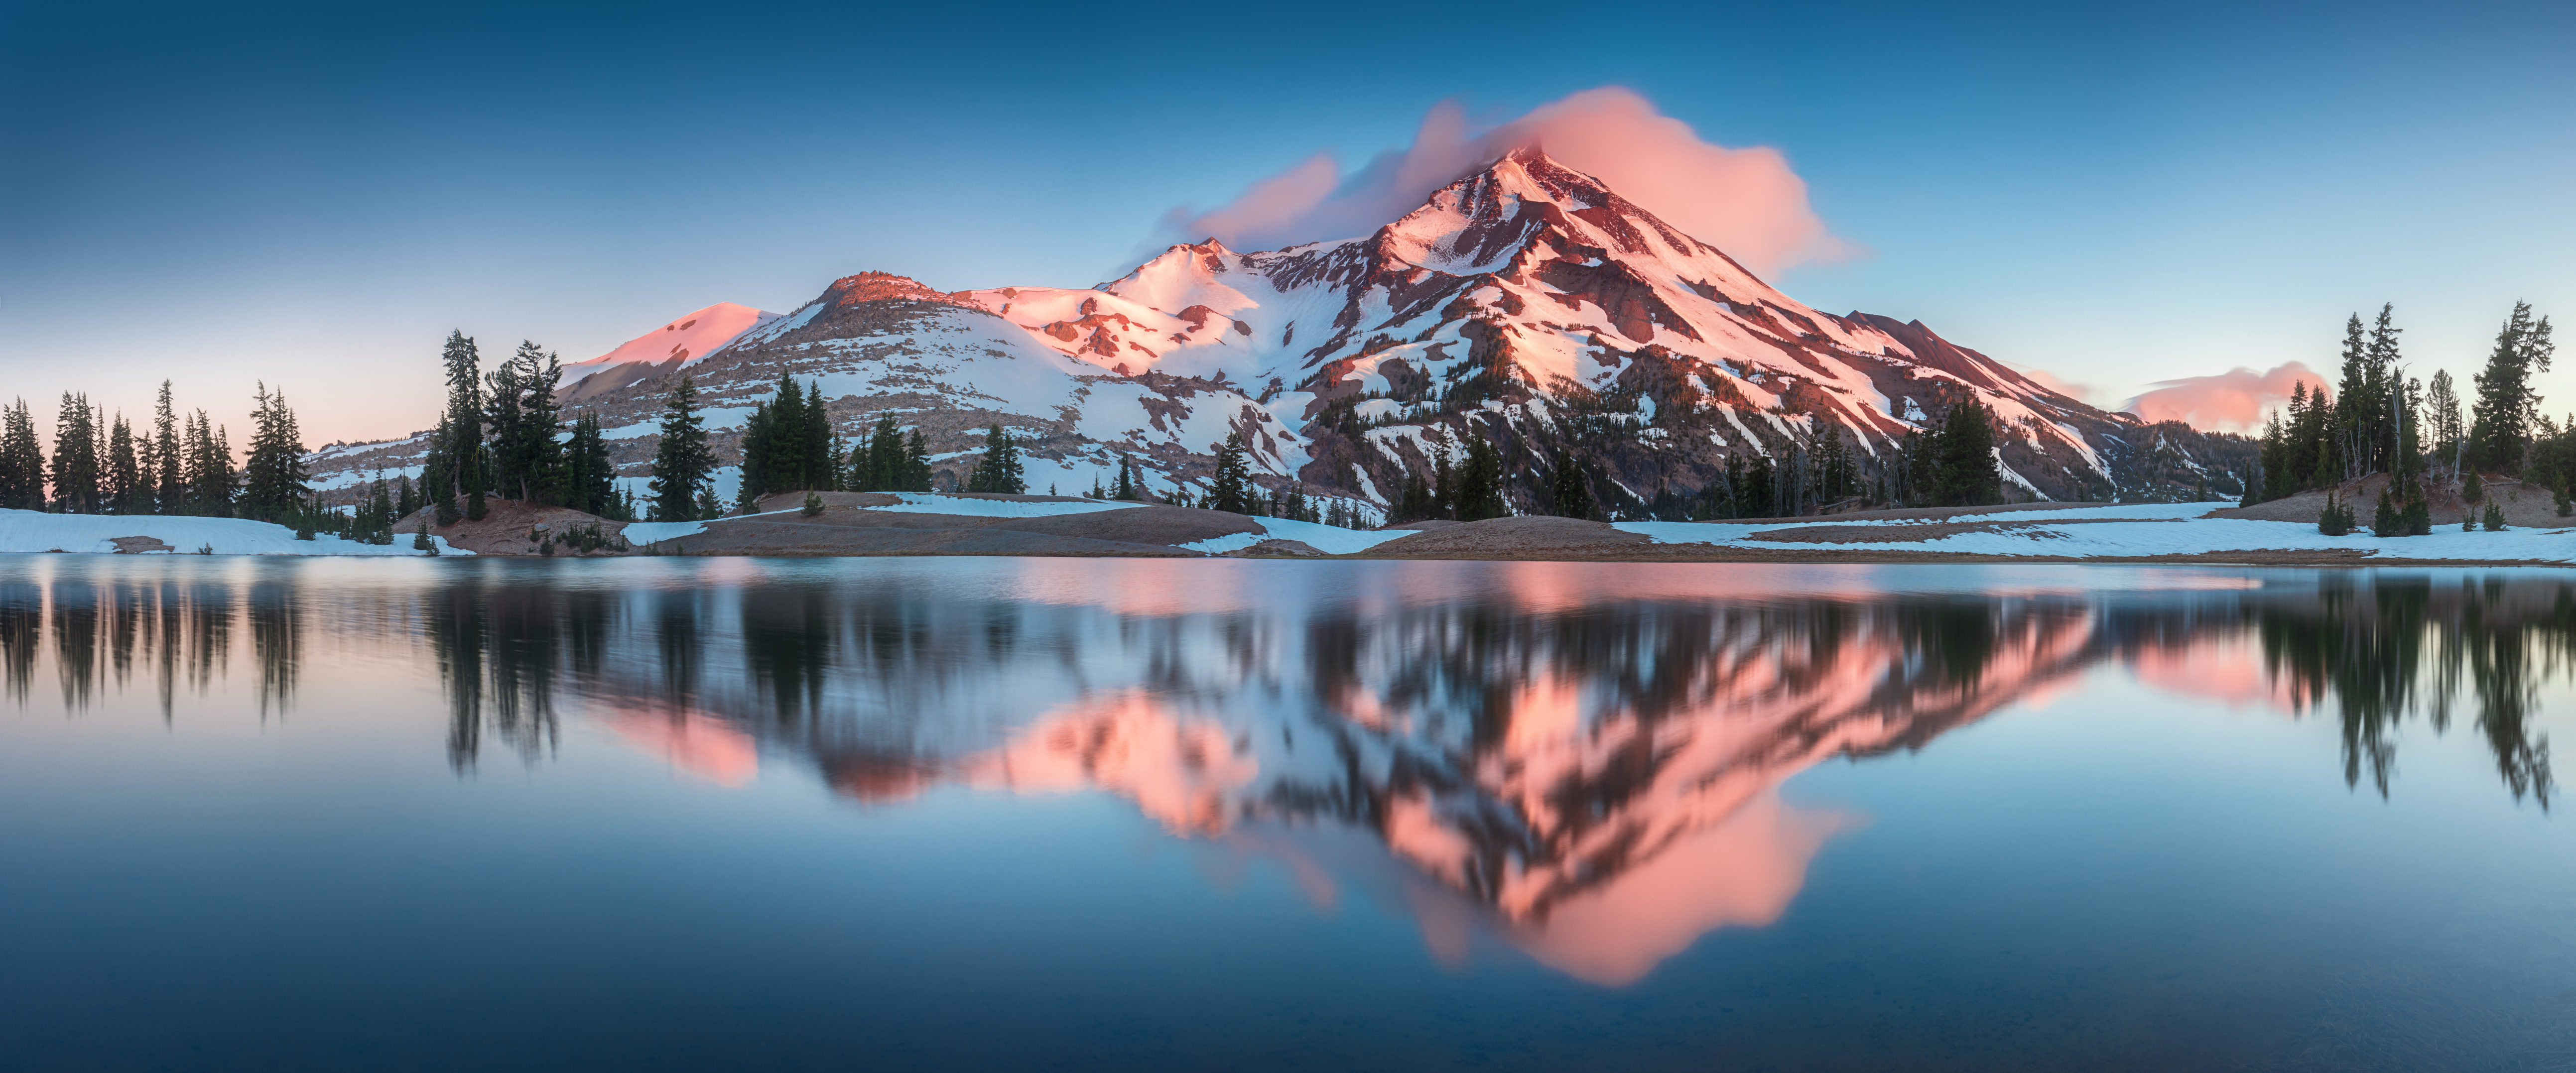 Summer Sunrise South Sister mountains in central Oregon near Bend are reflected in Green Lakes. Mountains in the cascade Range of Oregon, USA Beautiful landscape background - Image